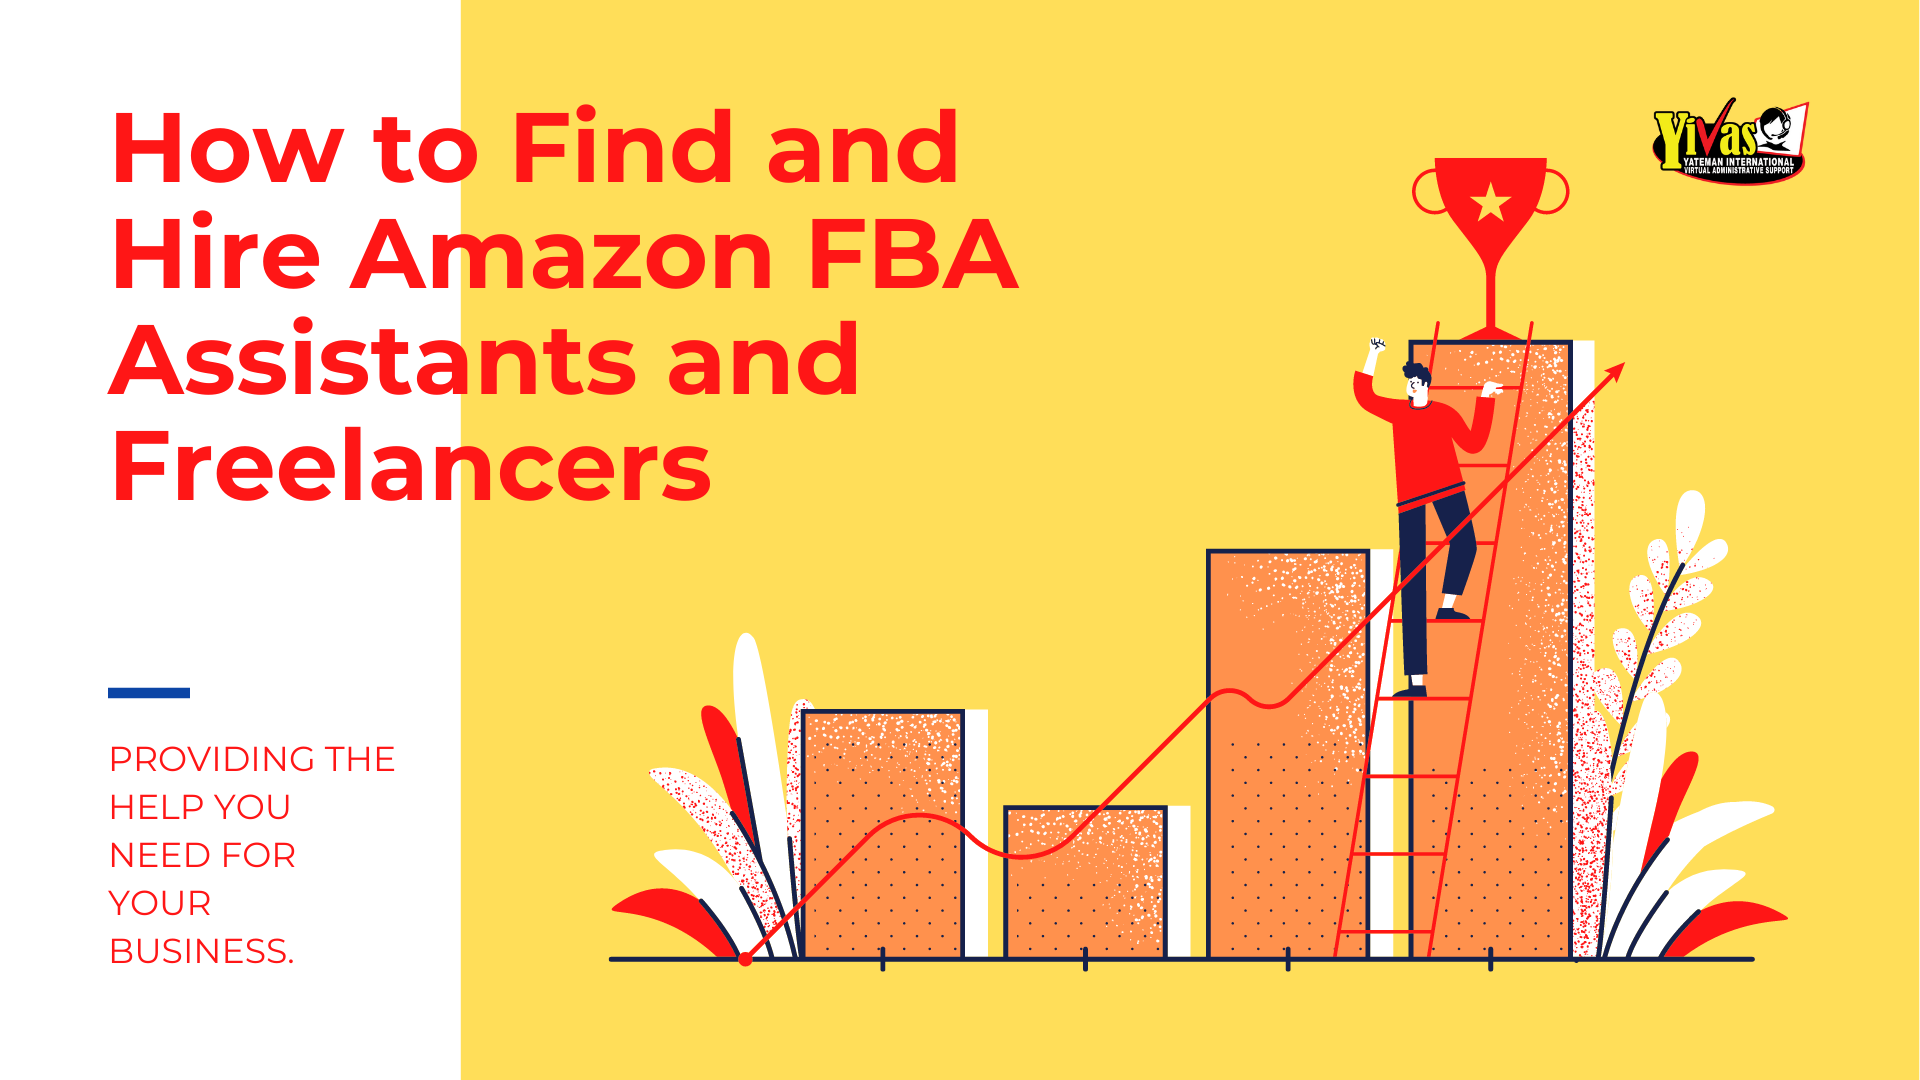 How to Find and Hire Amazon FBA Assistants and Freelancers